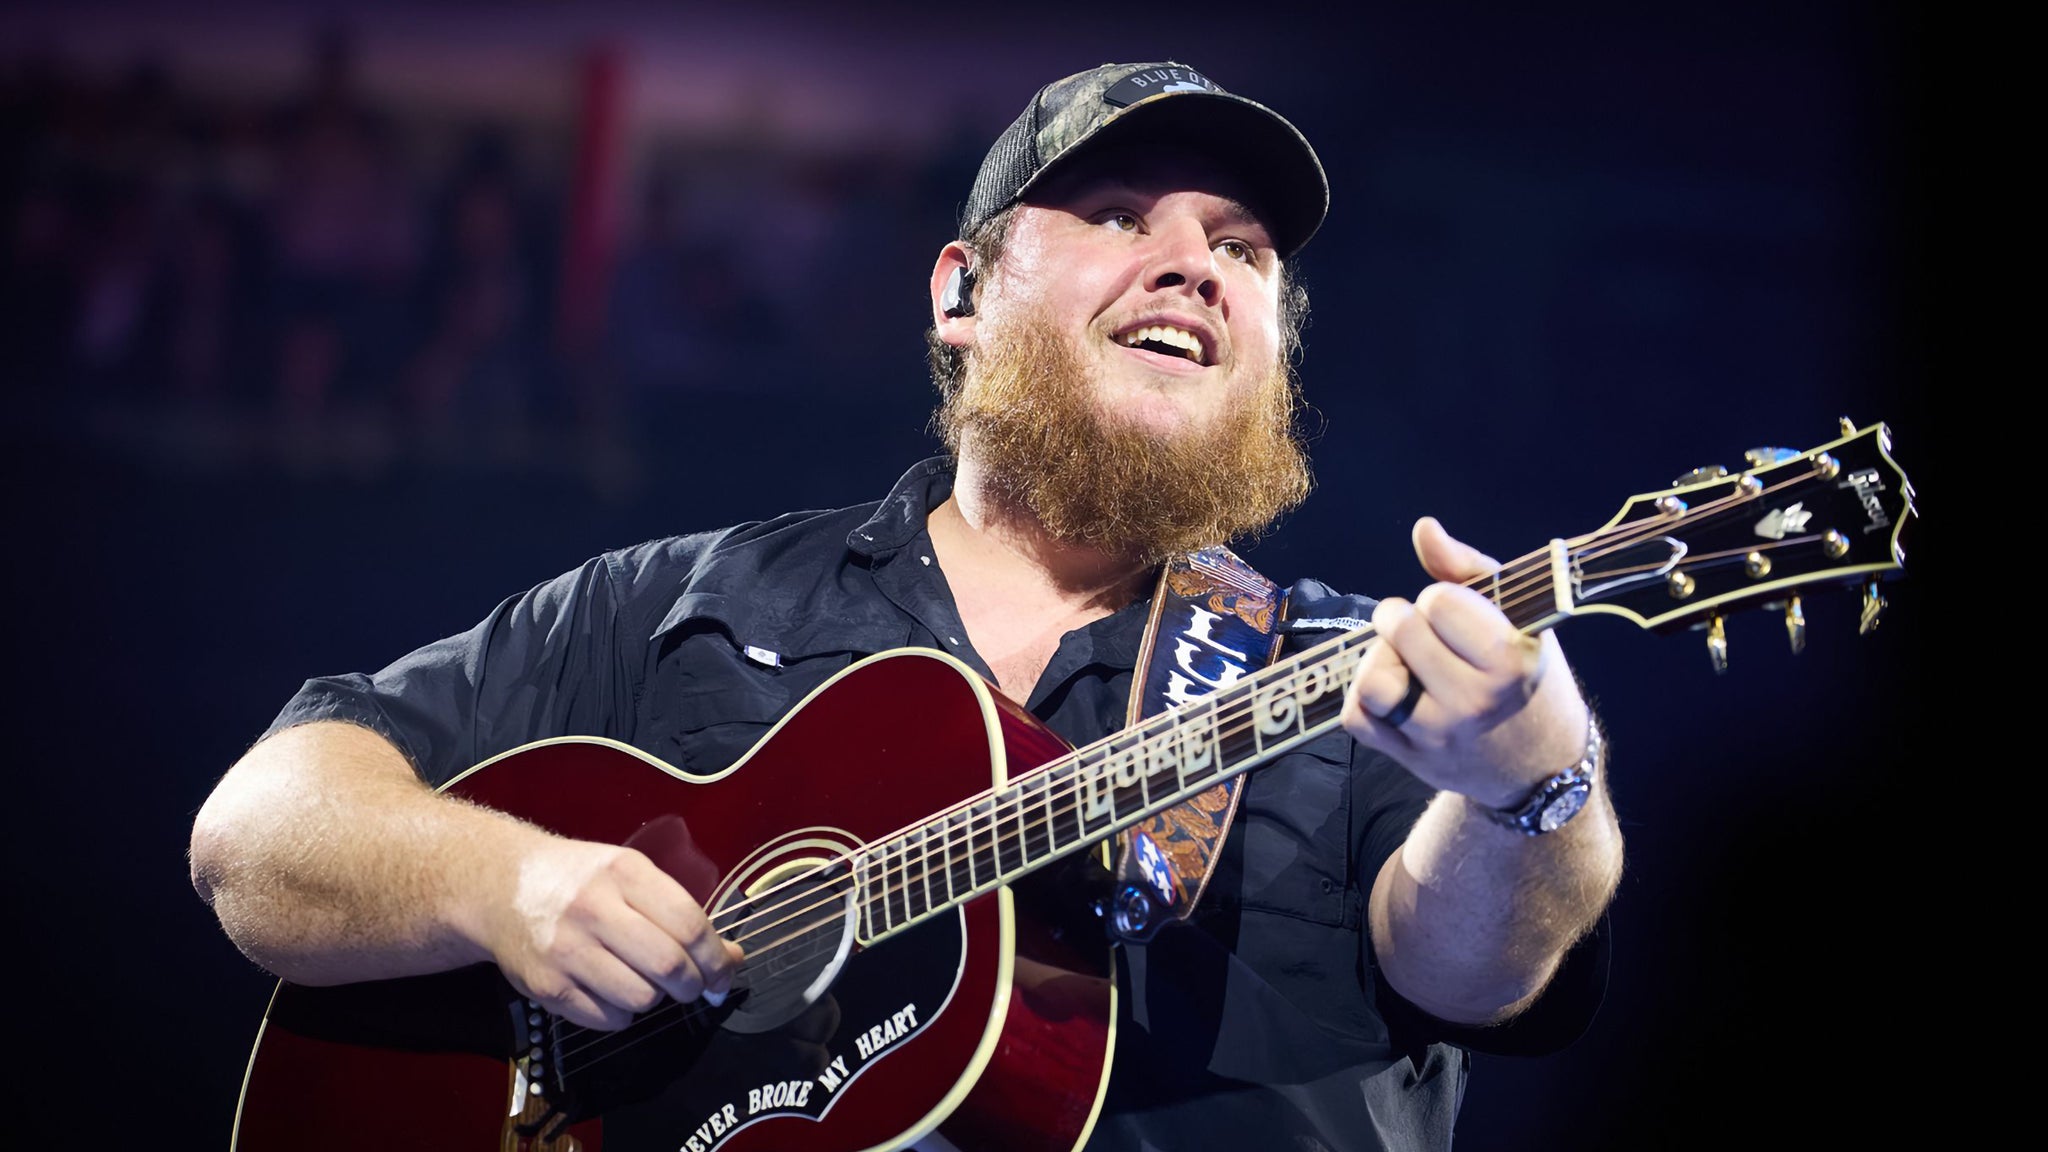 LUKE COMBS-GROWIN' UP AND GETTIN' OLD TOUR - Friday Ticket Only